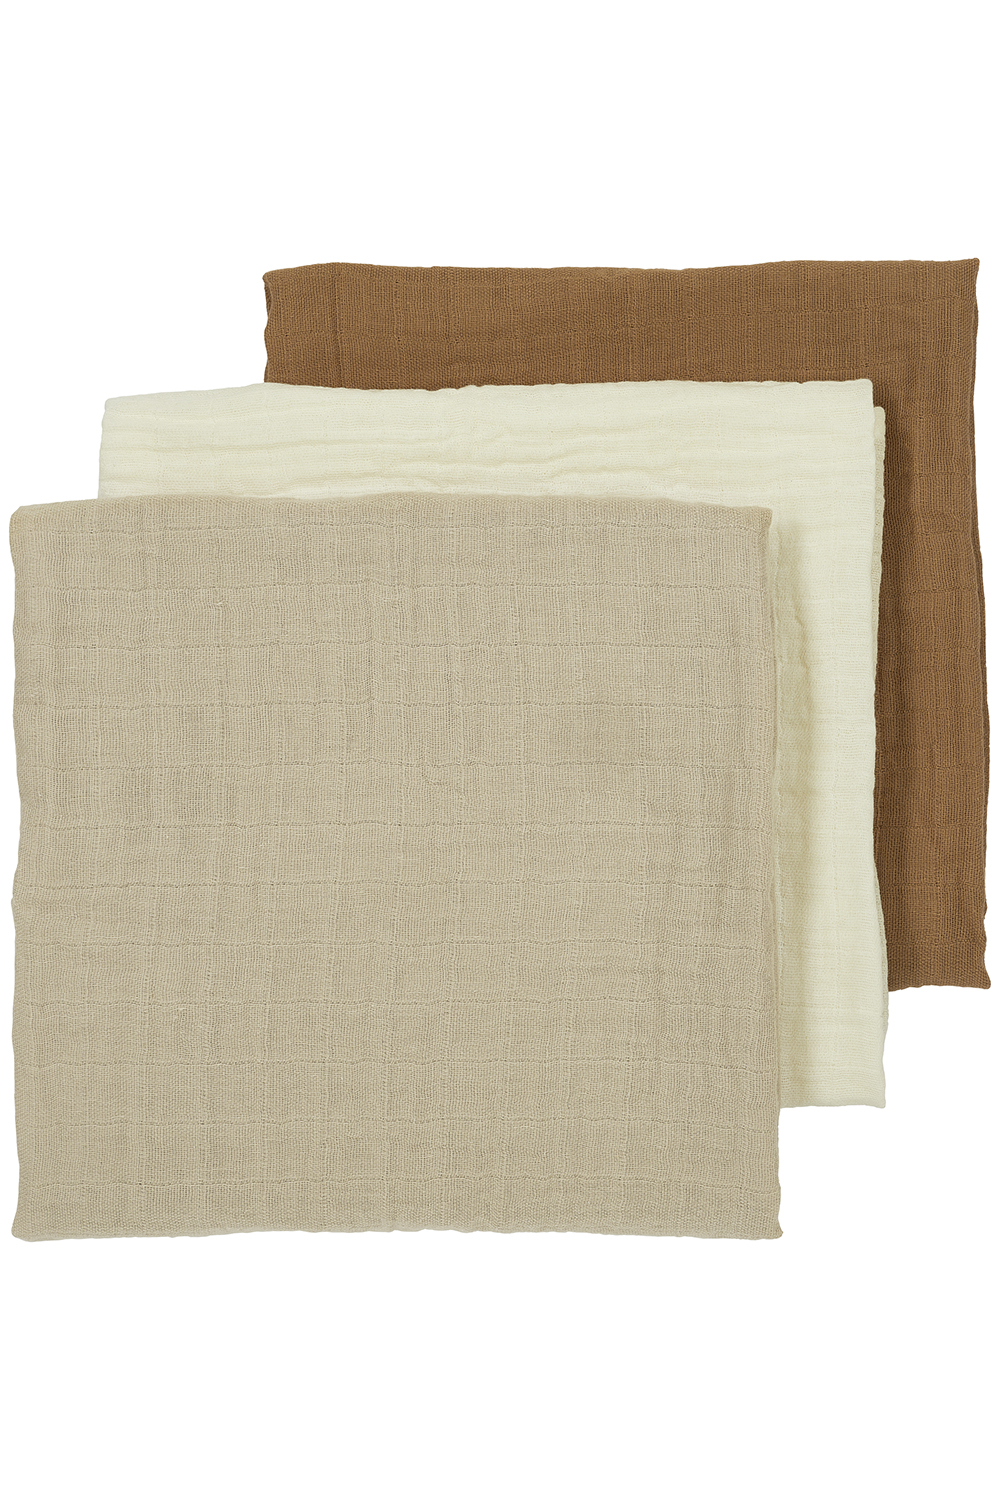 Square 3-pack Uni - offwhite/sand/toffee - 70x70cm